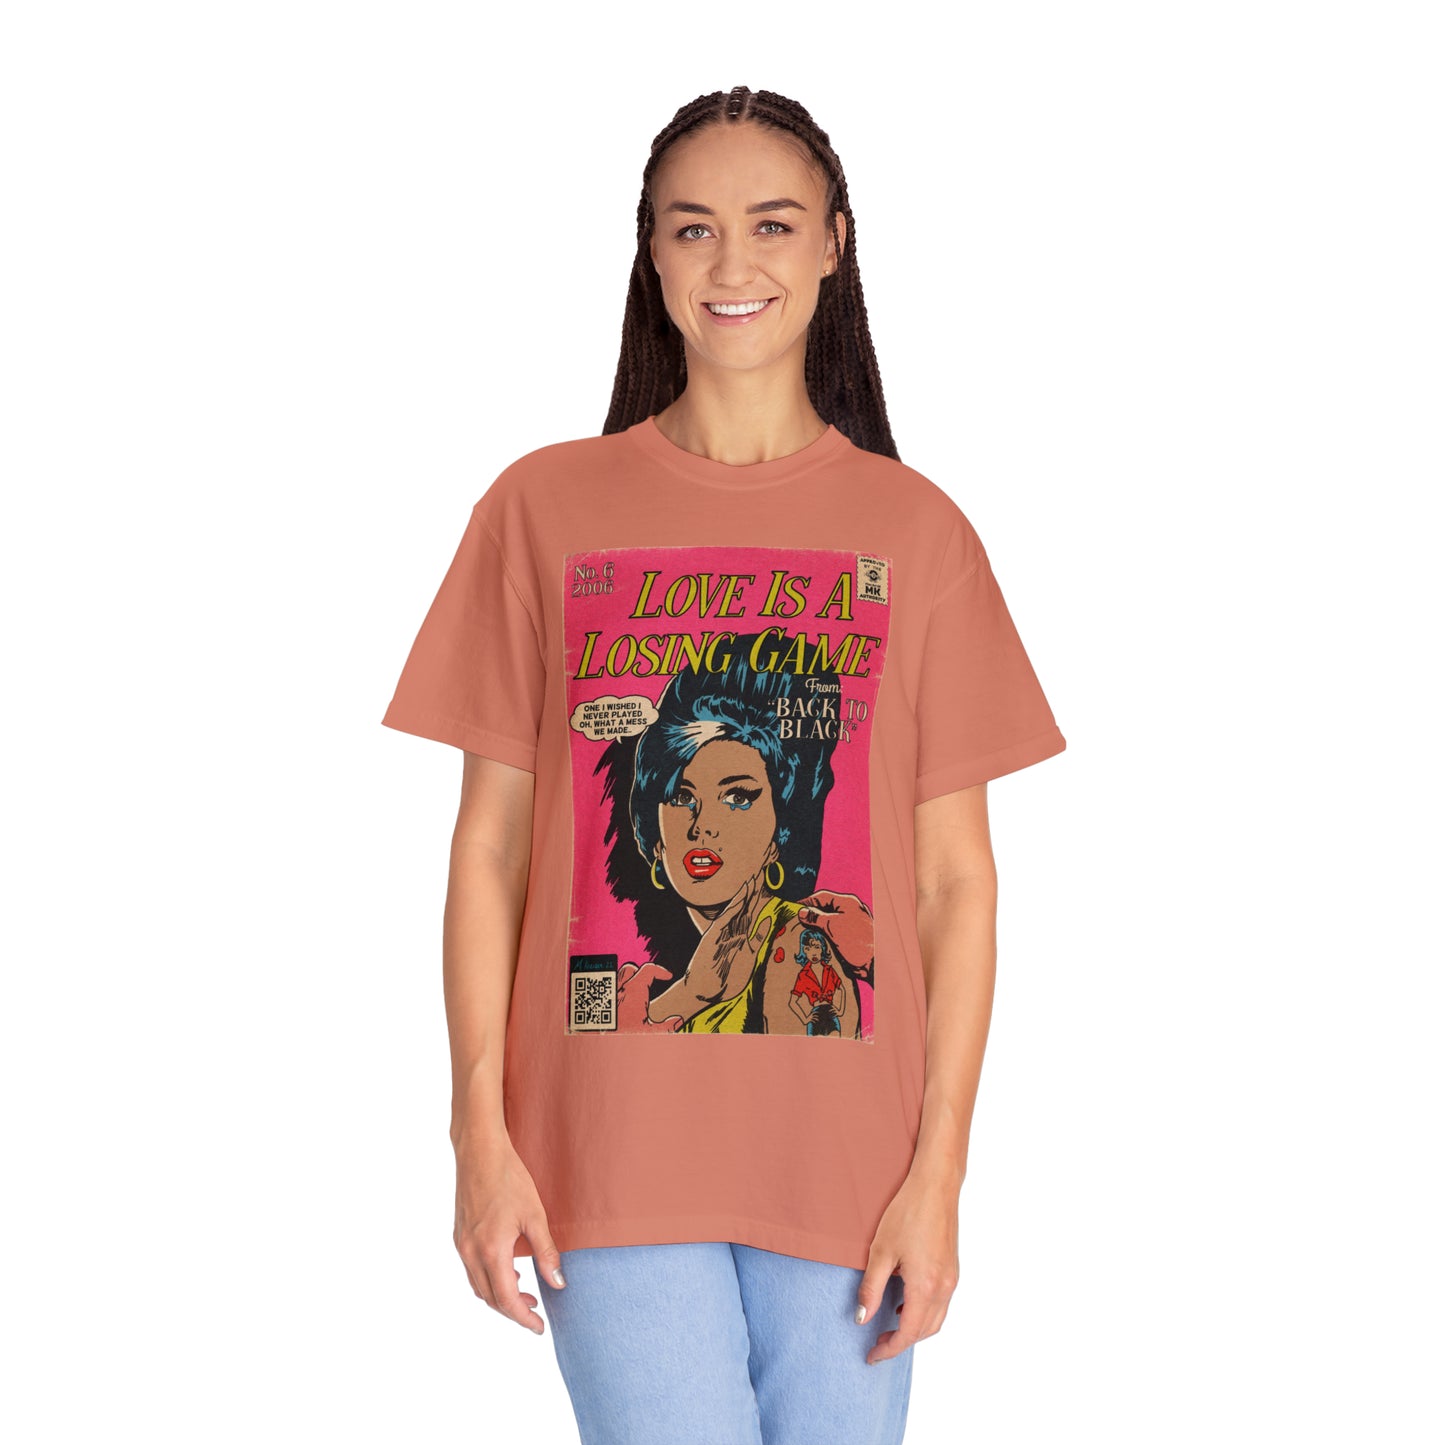 Amy Winehouse - Love is a Losing Game - Unisex Comfort Colors T-shirt